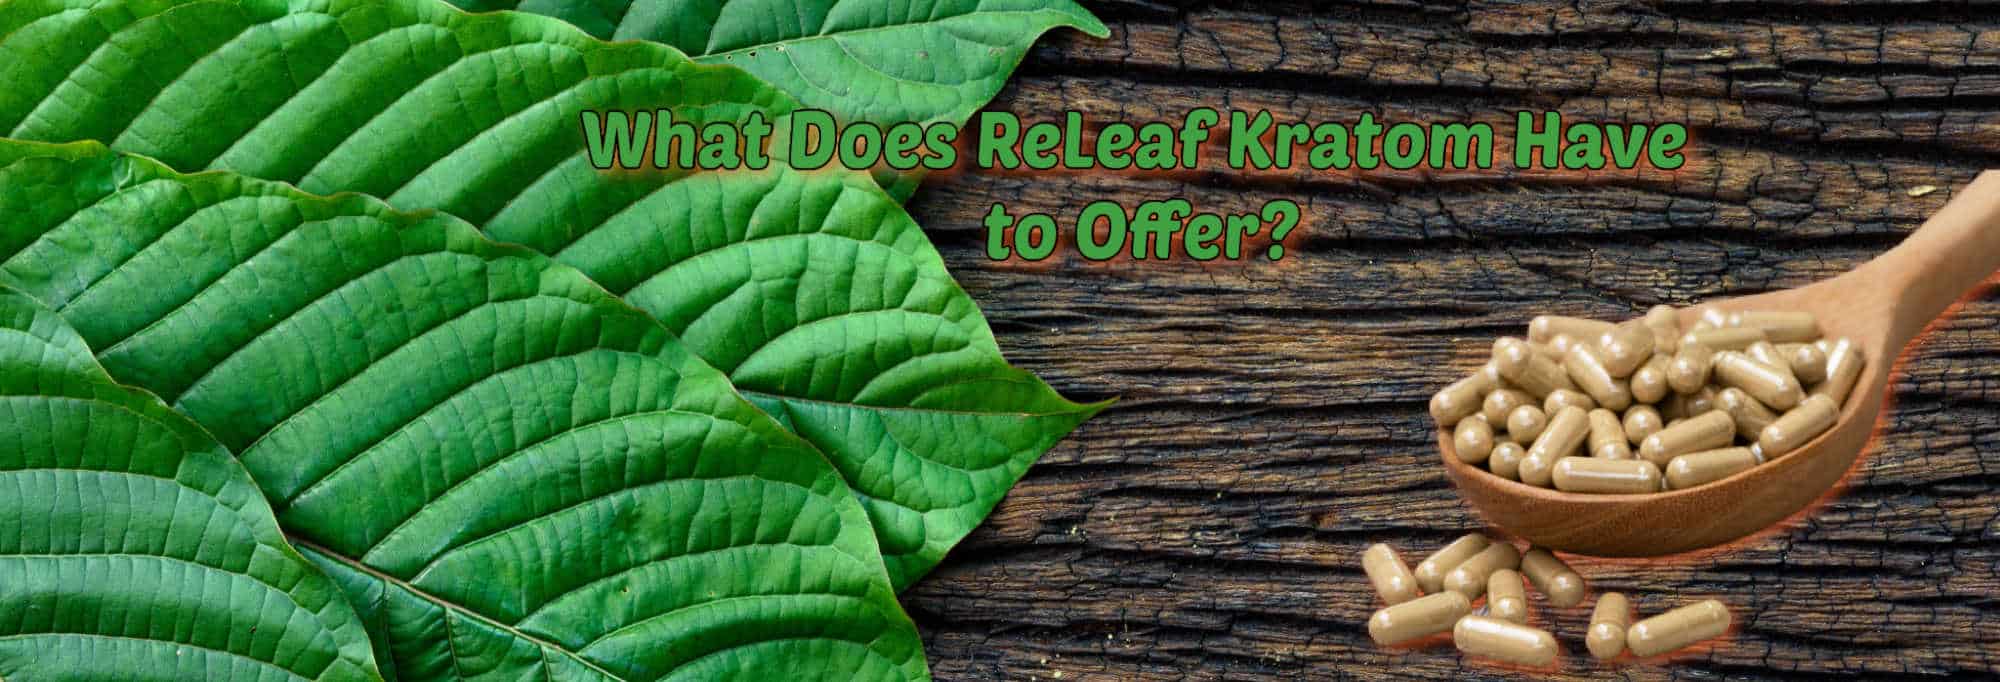 image of what does releaf kratom have to offer